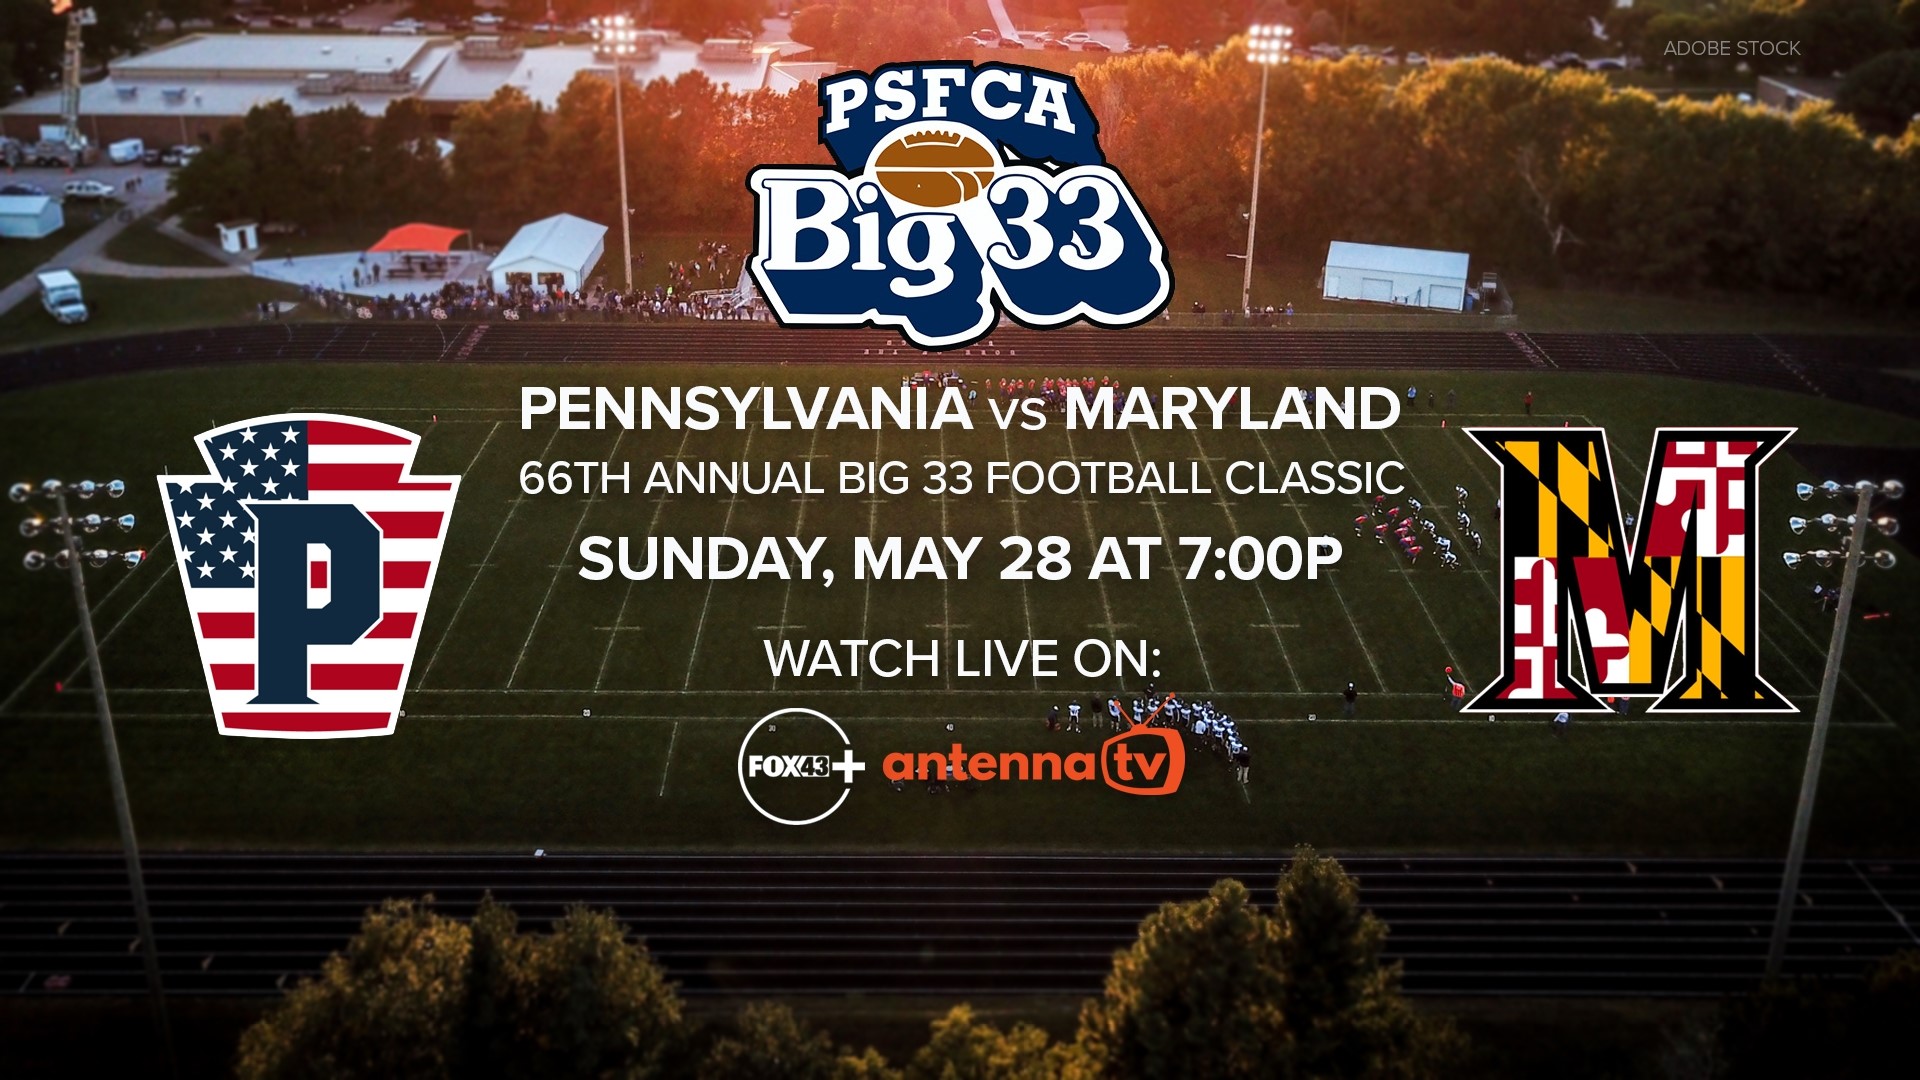 The PSFCA's 66th annual Big 33 Football Classic pits Team Pennsylvania vs. Team Maryland in a battle of All-Stars.